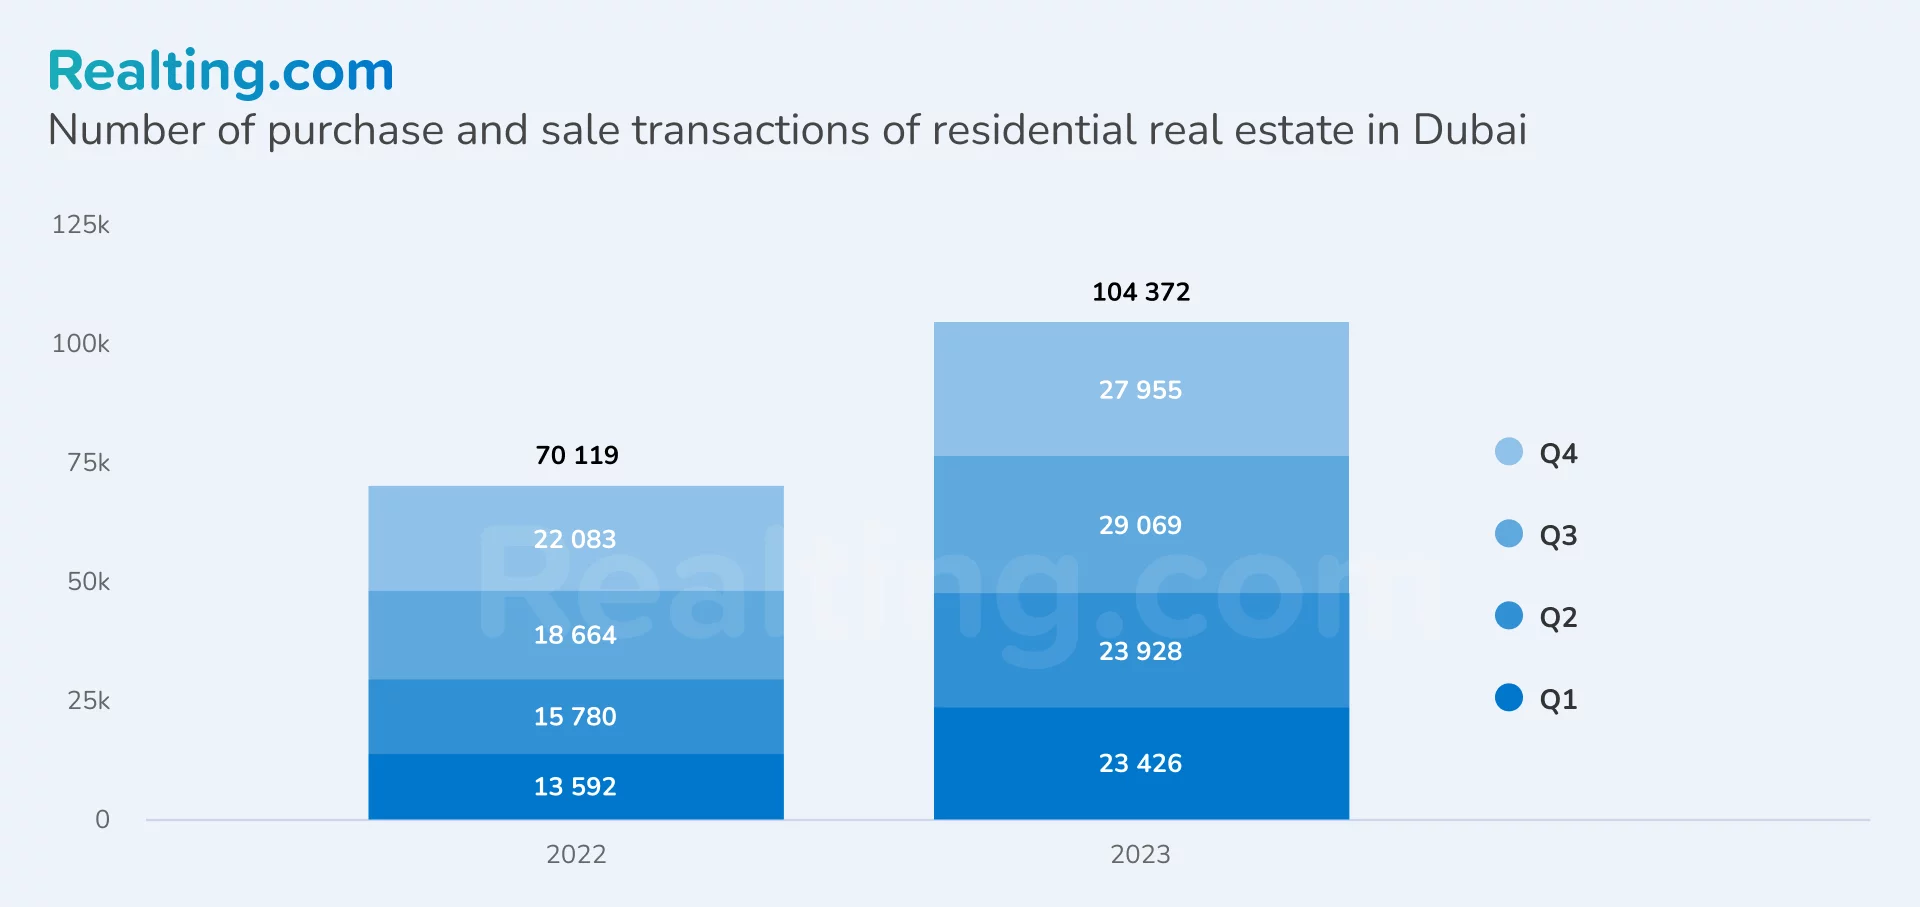 Number of residential real estate sale and purchase transactions in Dubai